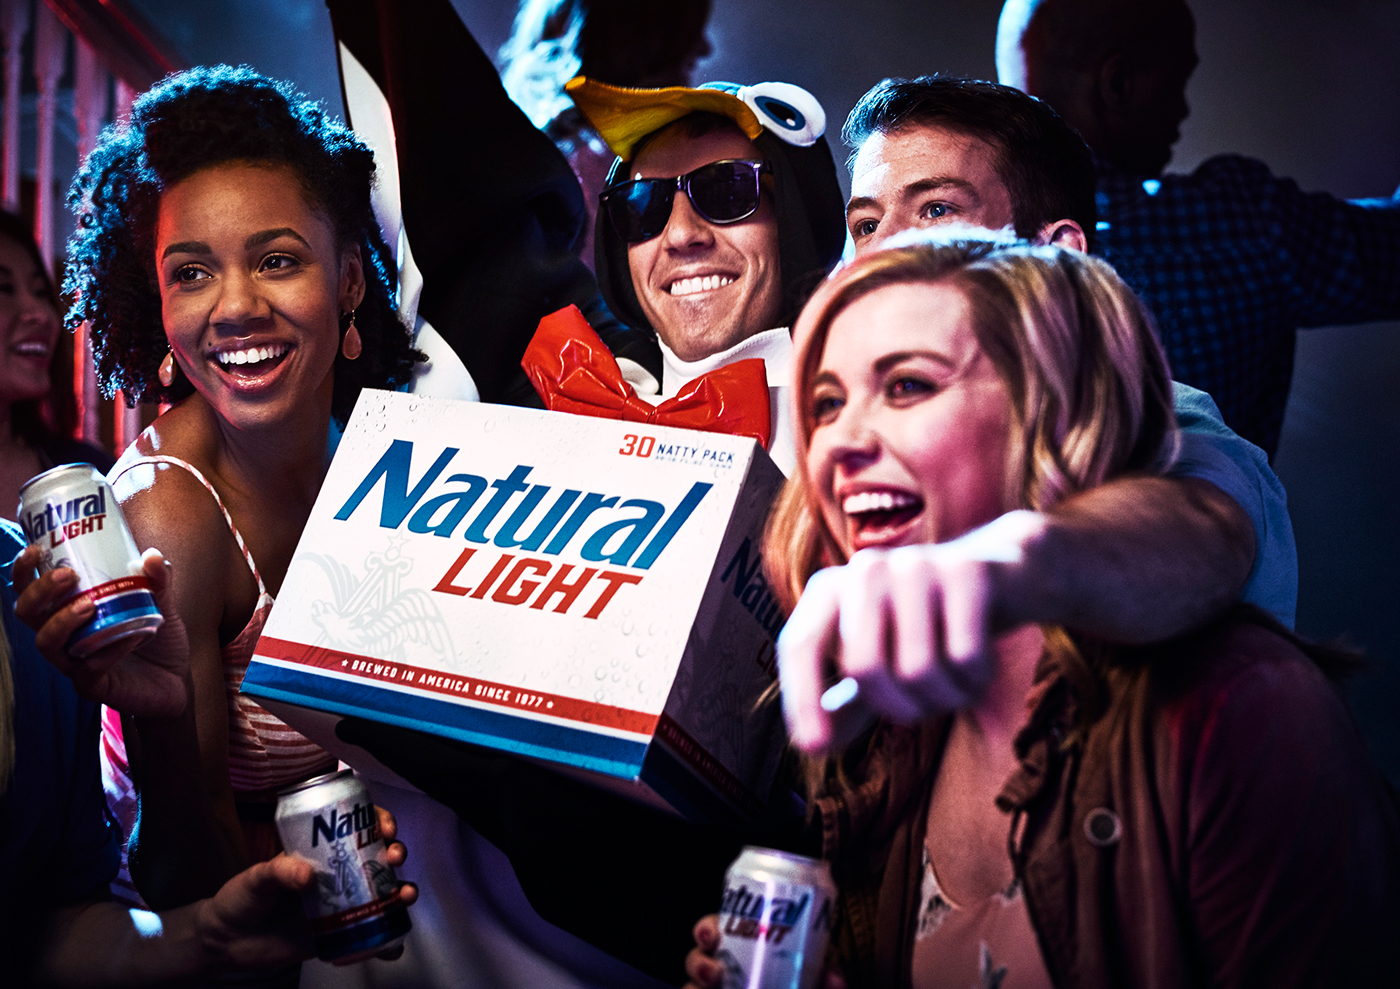 NATURAL LIGHT BEER "Every Natty Has A Story"